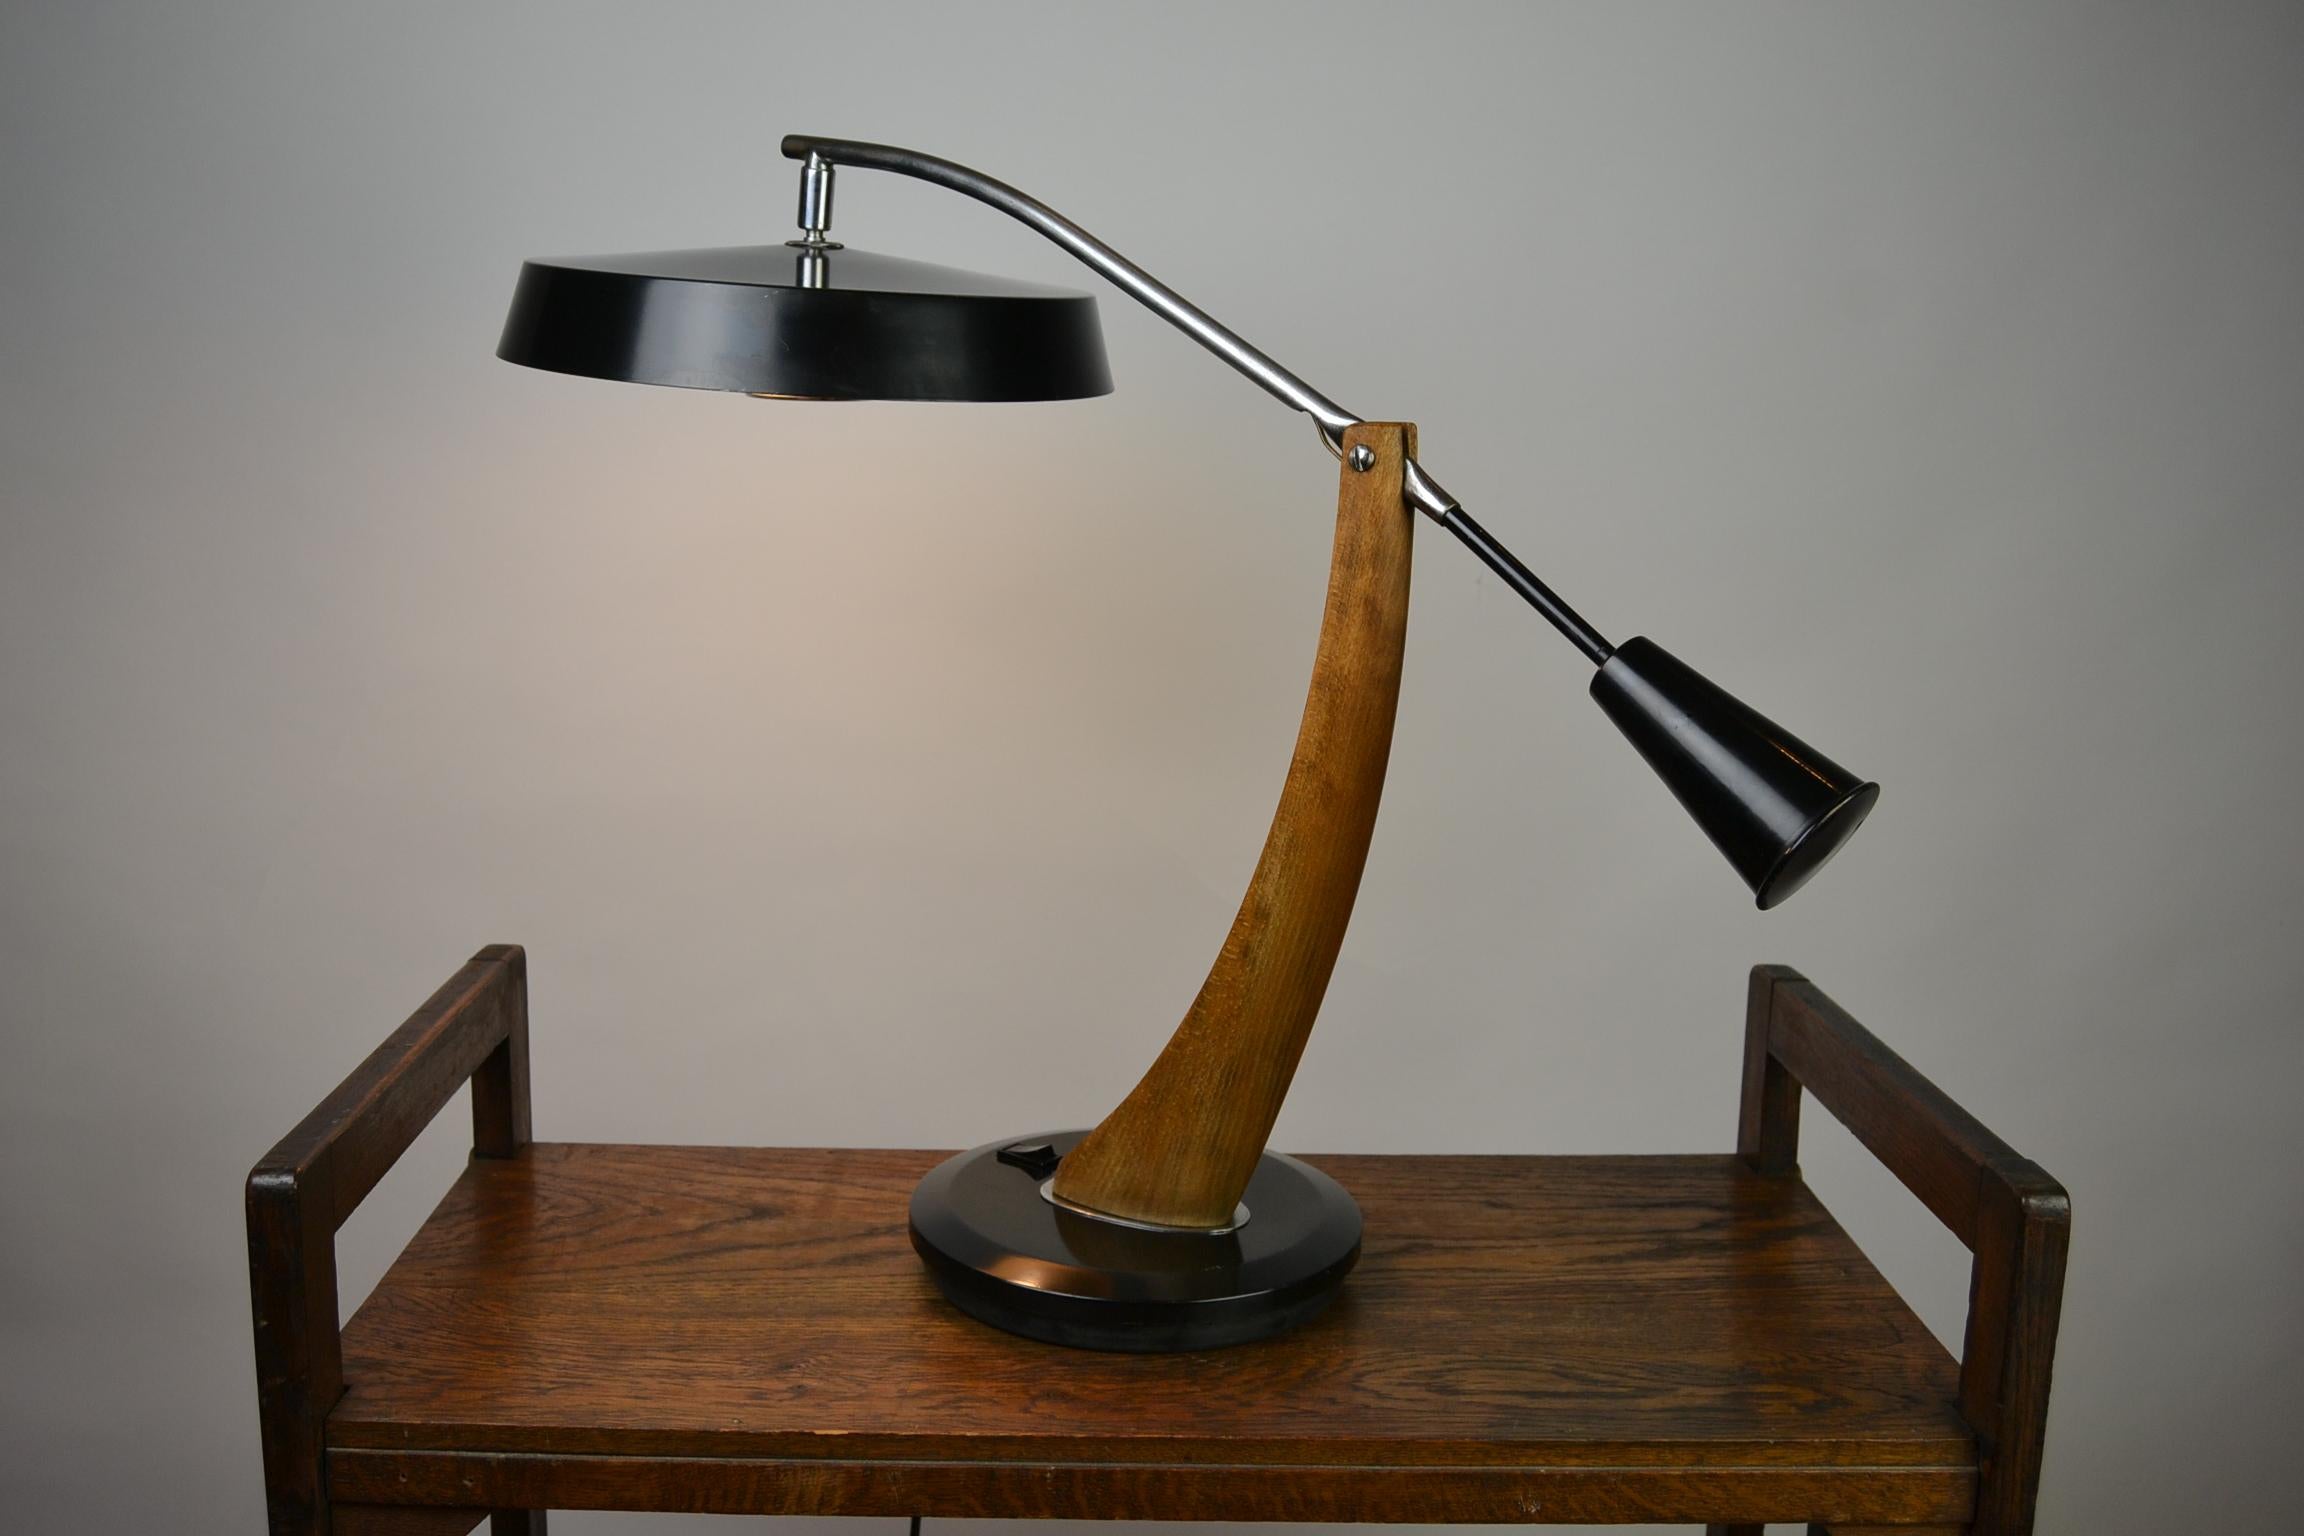 1960s desk lamp by Fase Madrid, Spain.
This Mid-20th century desk lamp, table lamp is made of black lacquered metal and wood ,
and called the 'presidente model'.
This vintage lighting can be rotated around on his base and the shade can be put in